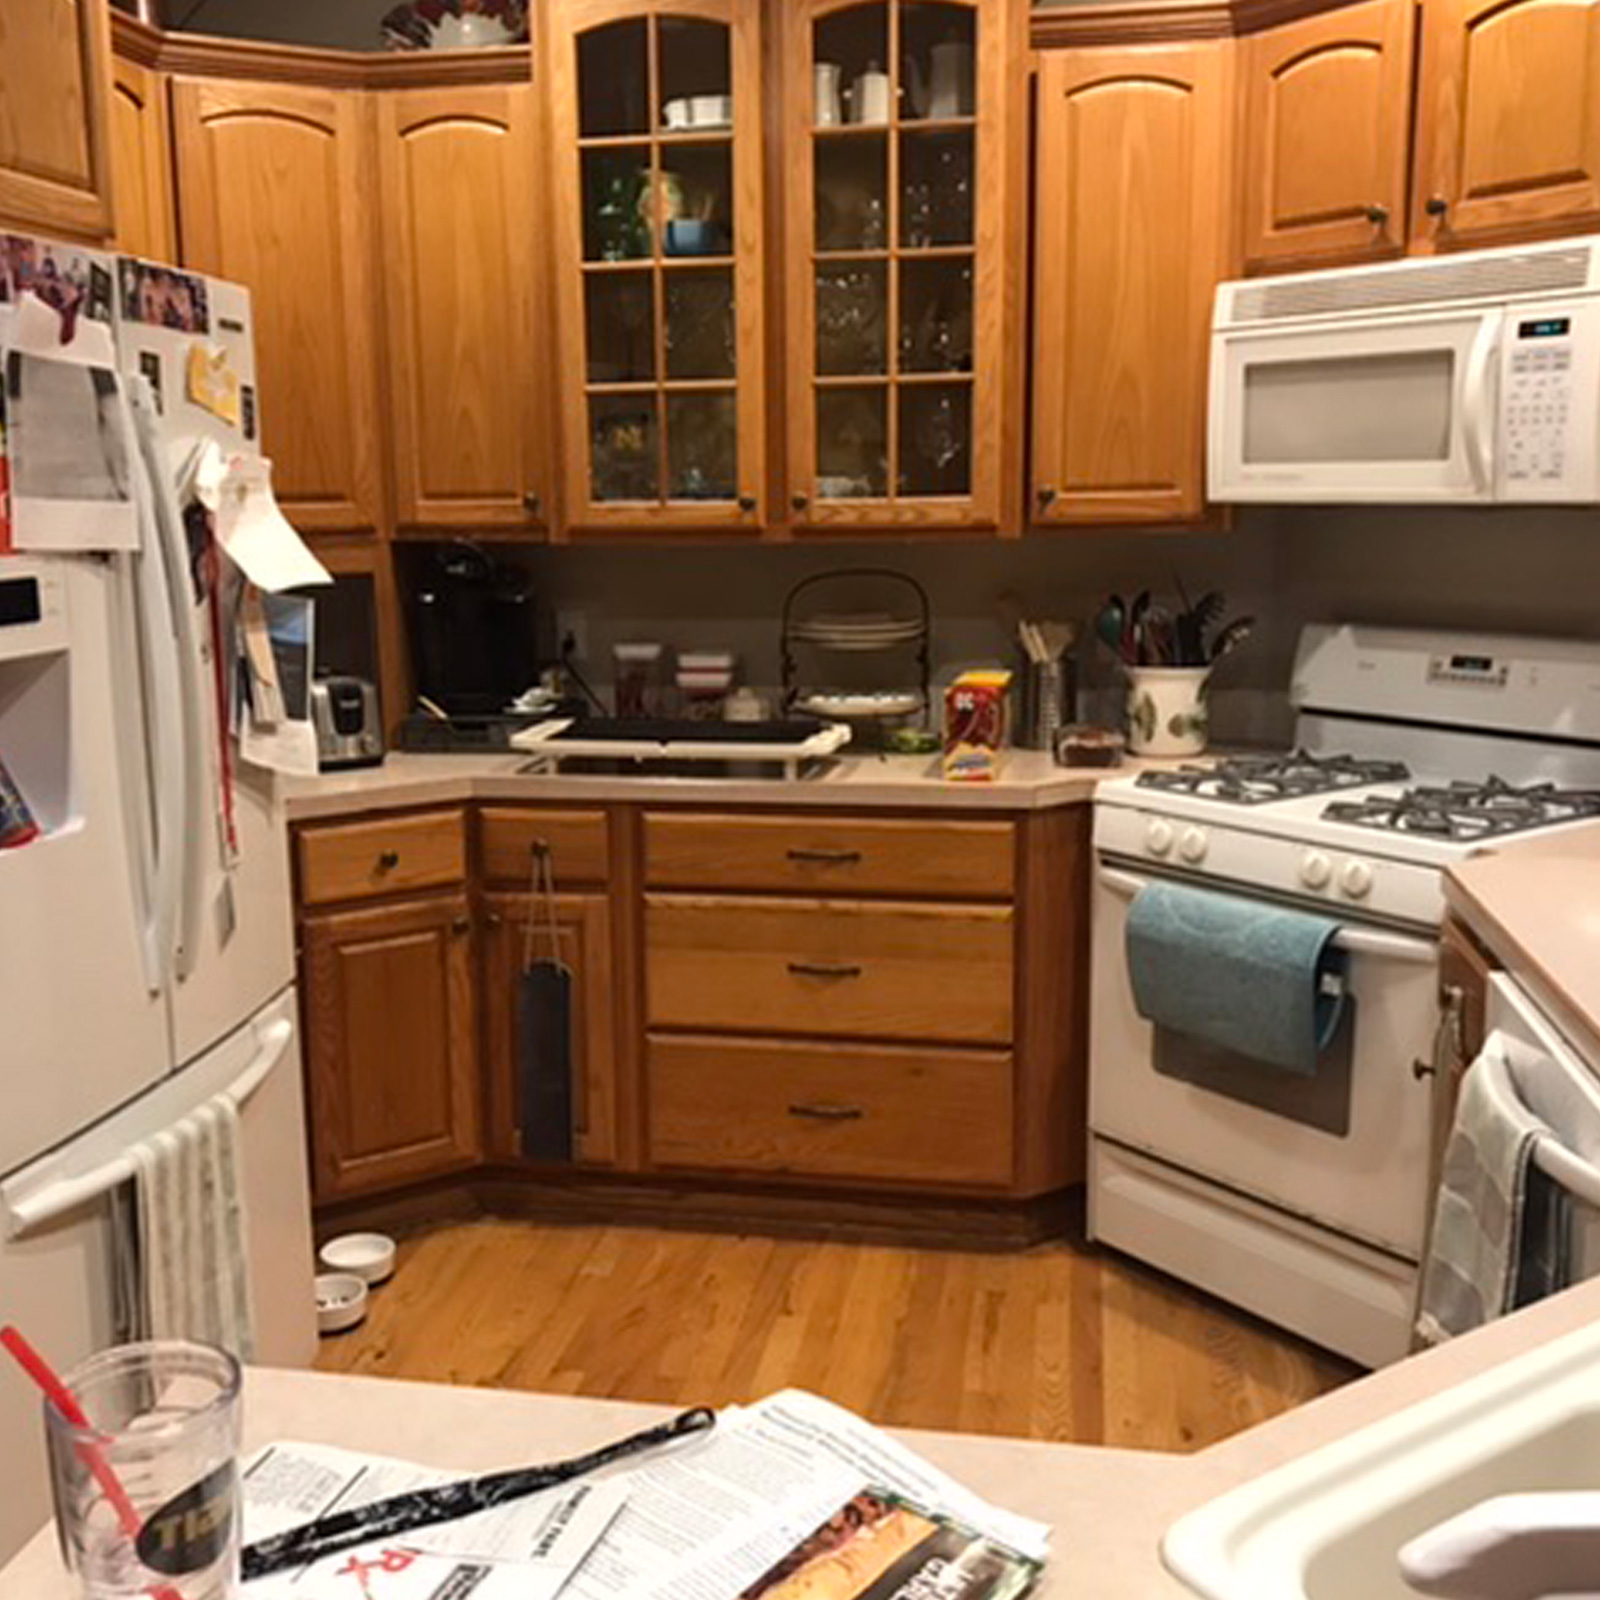 Entry 41 - This kitchen really needs some love